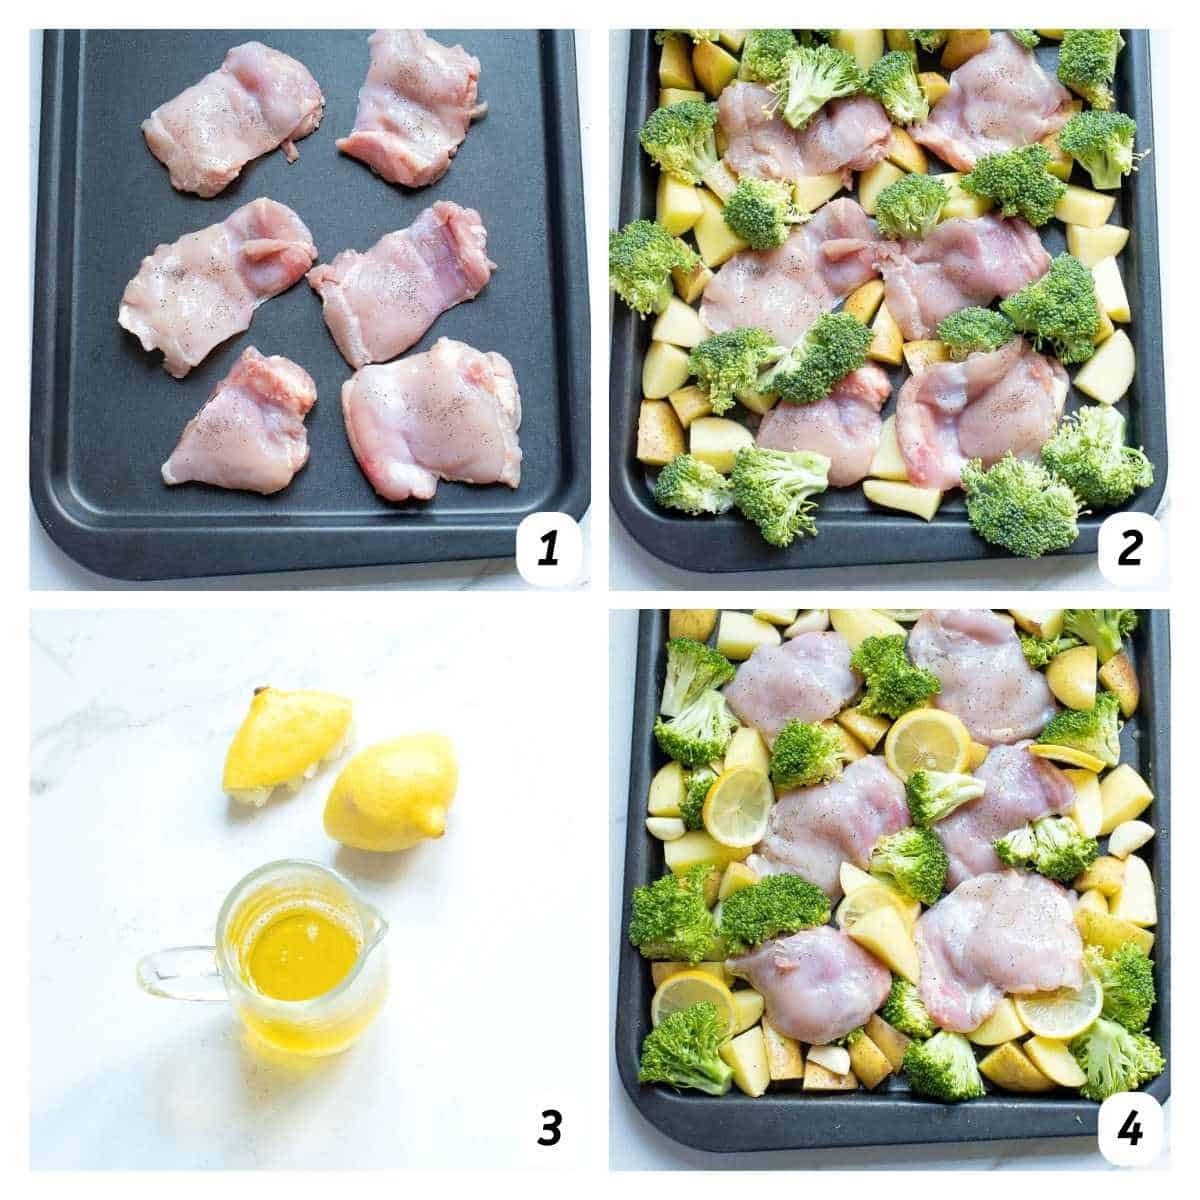 Four panel grid of process shots 1-4 - preparing chicken thighs and vegetables, coating with olive oil and lemon, and placing on a baking sheet.